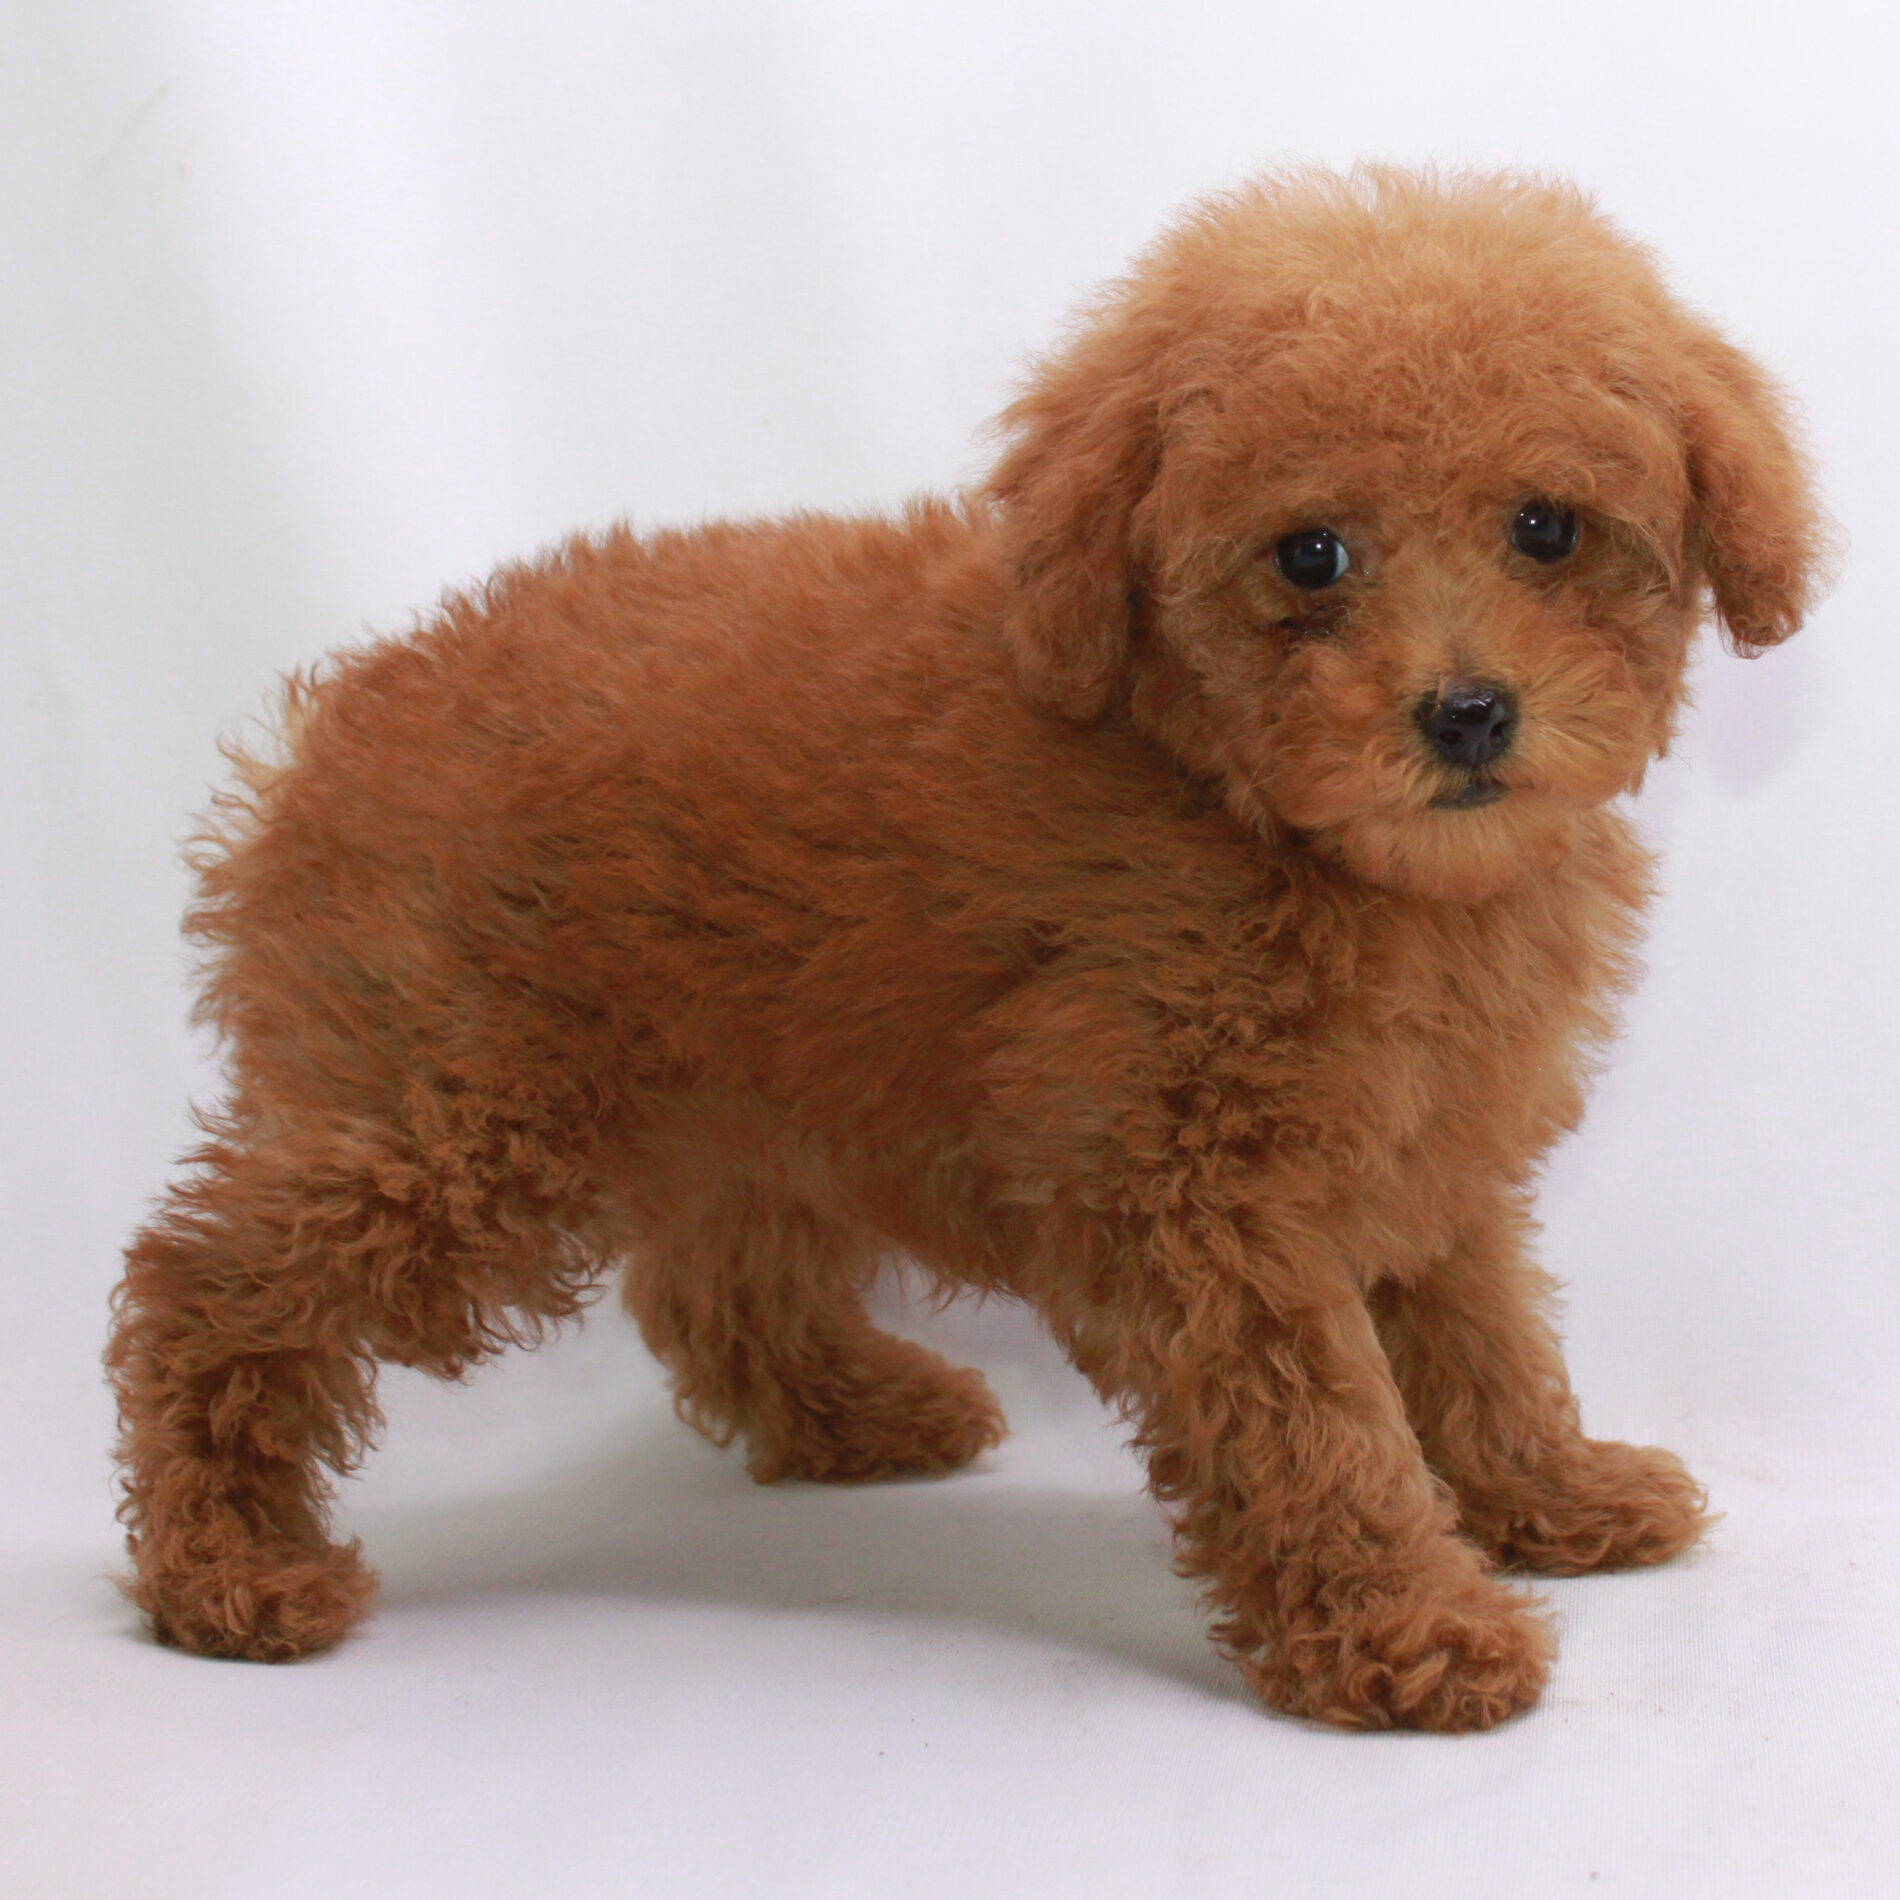 how much is a red poodle?